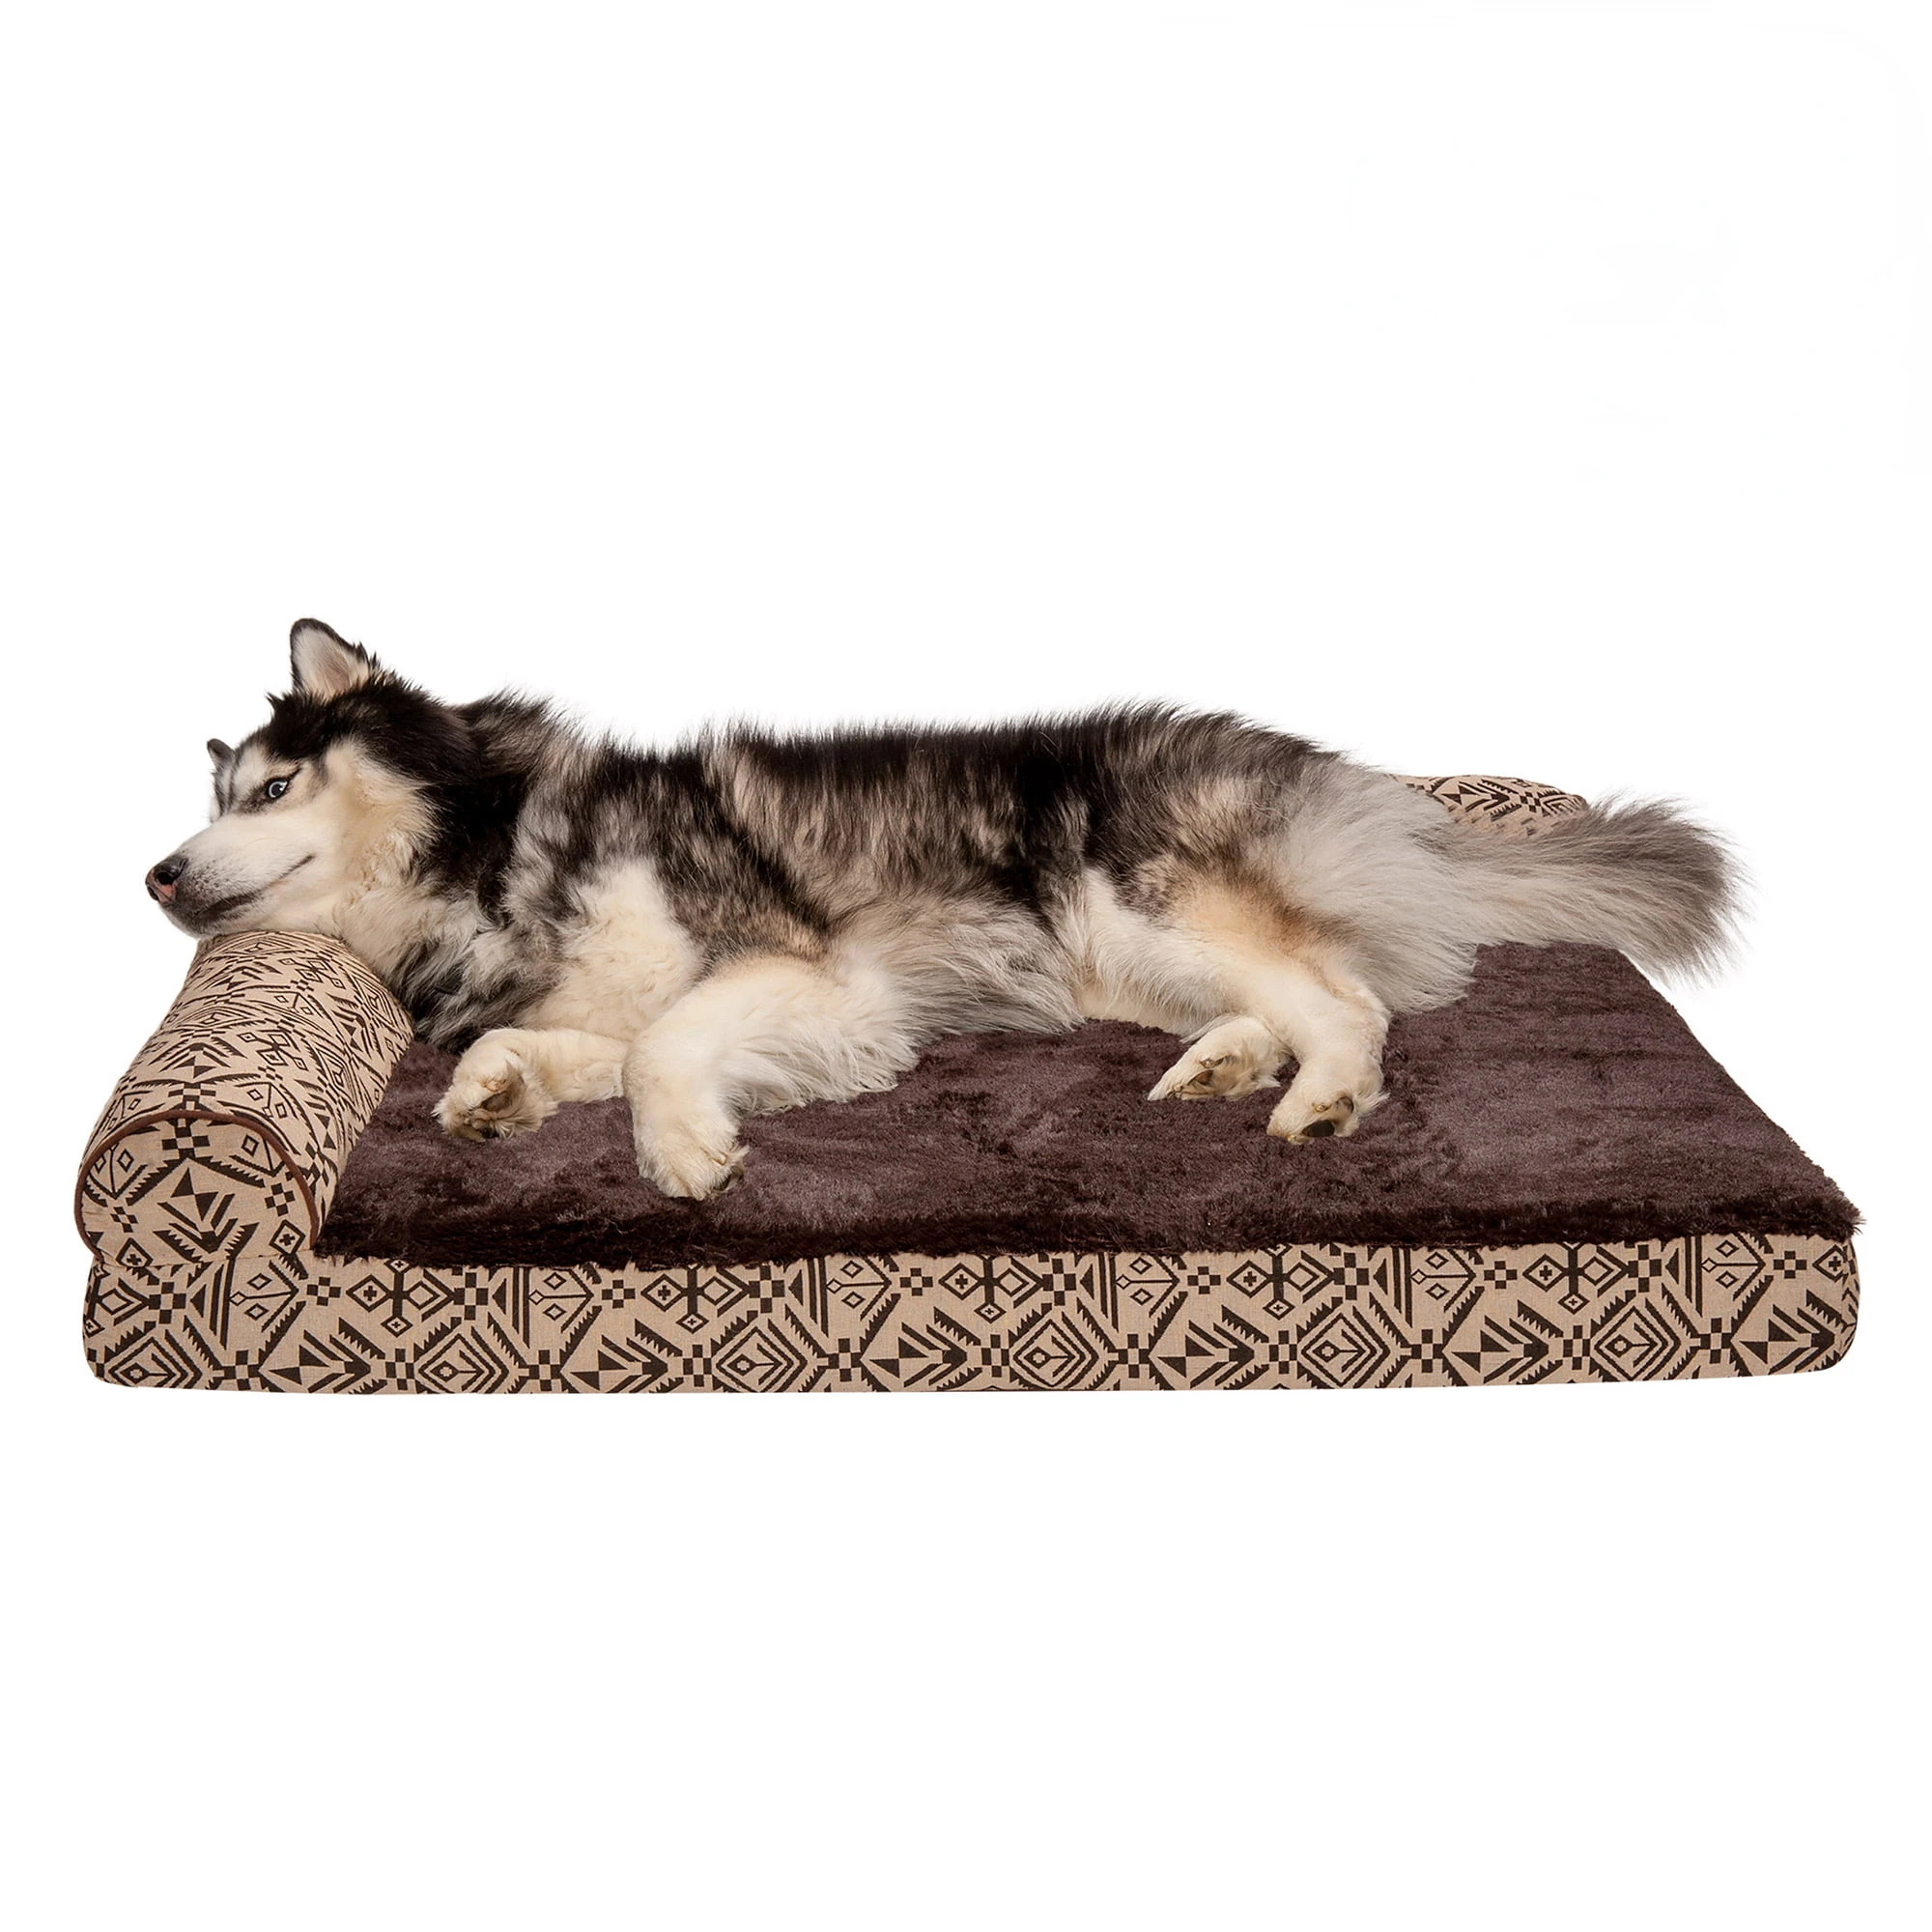 

Pet Dog Bed | Deluxe Memory Foam Southwest Kilim L-Shaped Chaise Couch Pet Bed for Dogs & Cats, Desert Brown, Jumbo